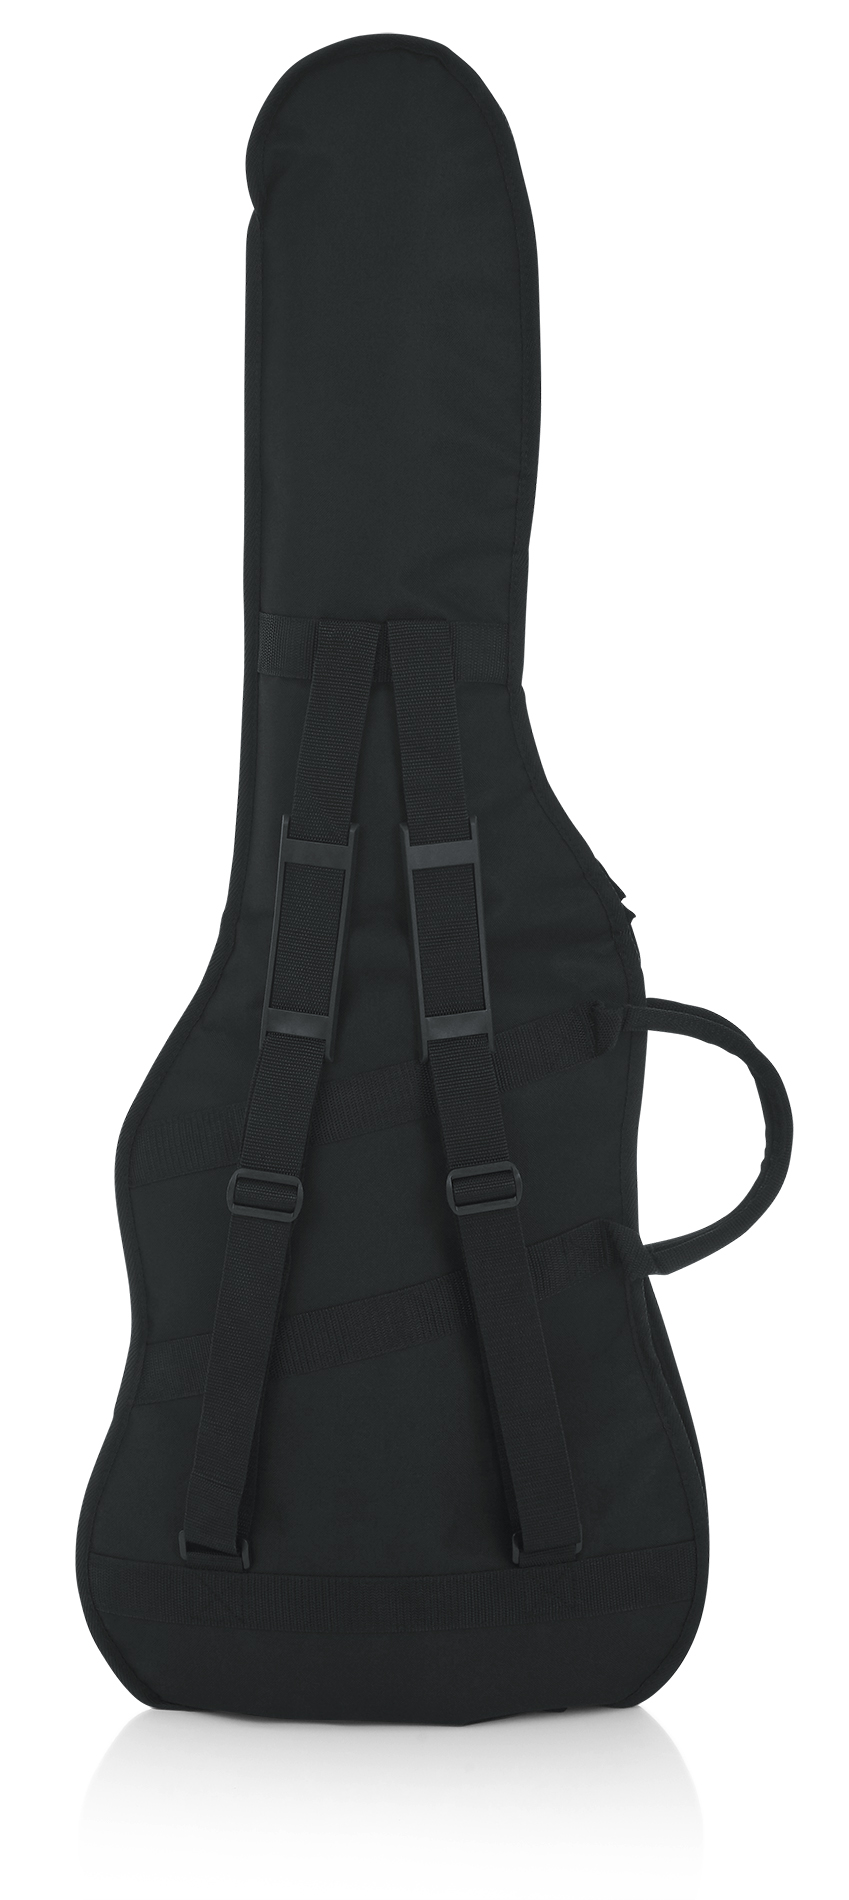 Fixing a tear in the backpack strap of a gig bag